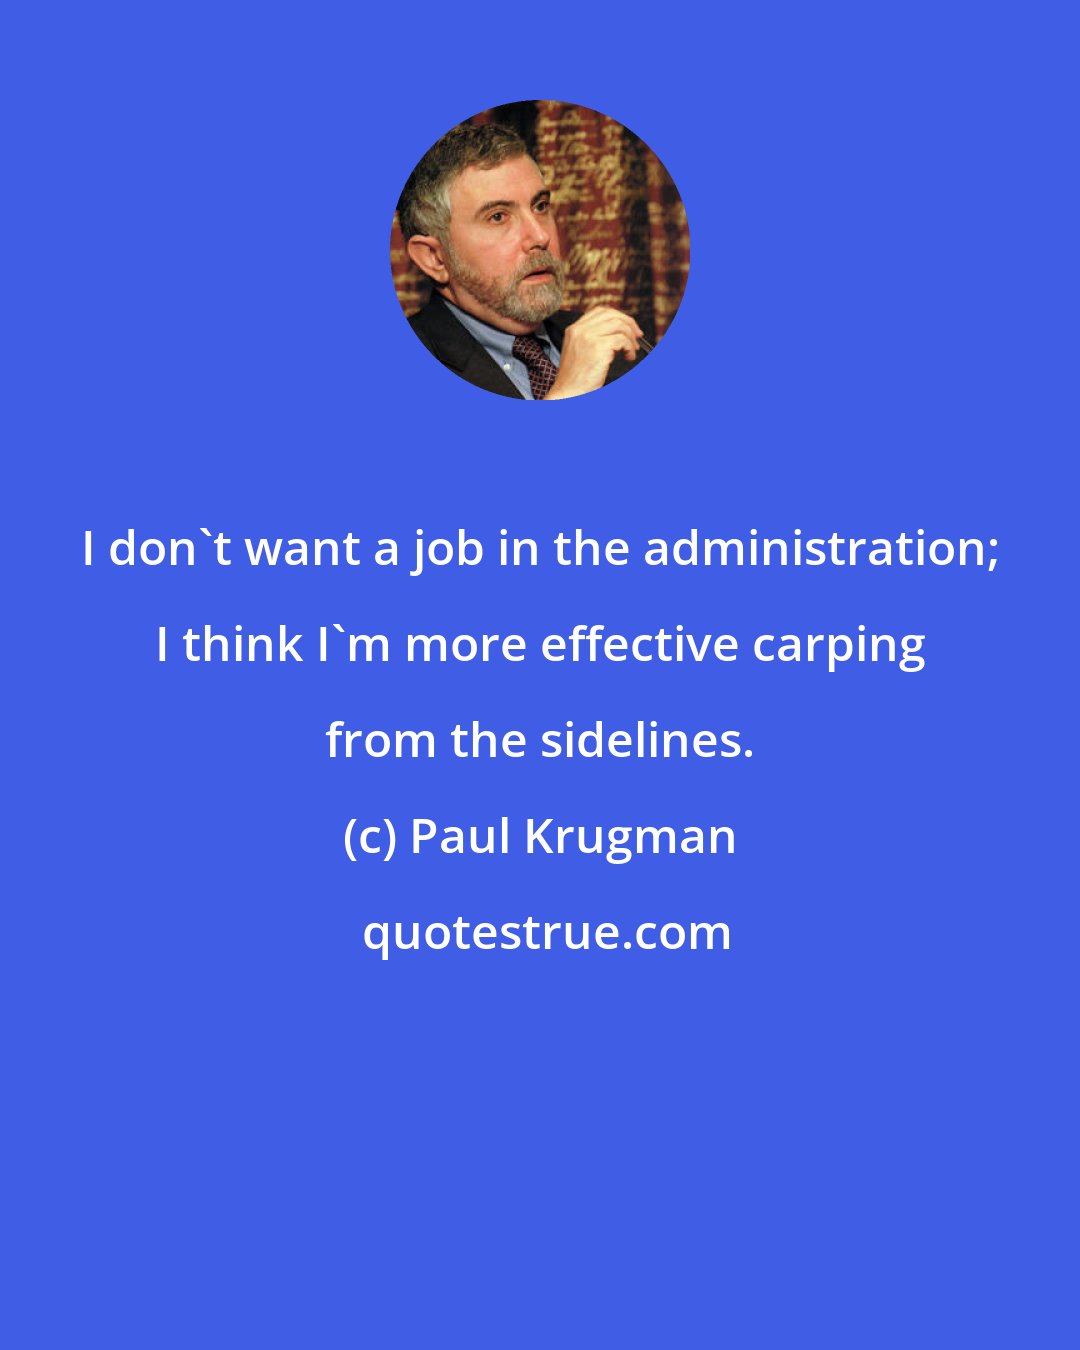 Paul Krugman: I don't want a job in the administration; I think I'm more effective carping from the sidelines.